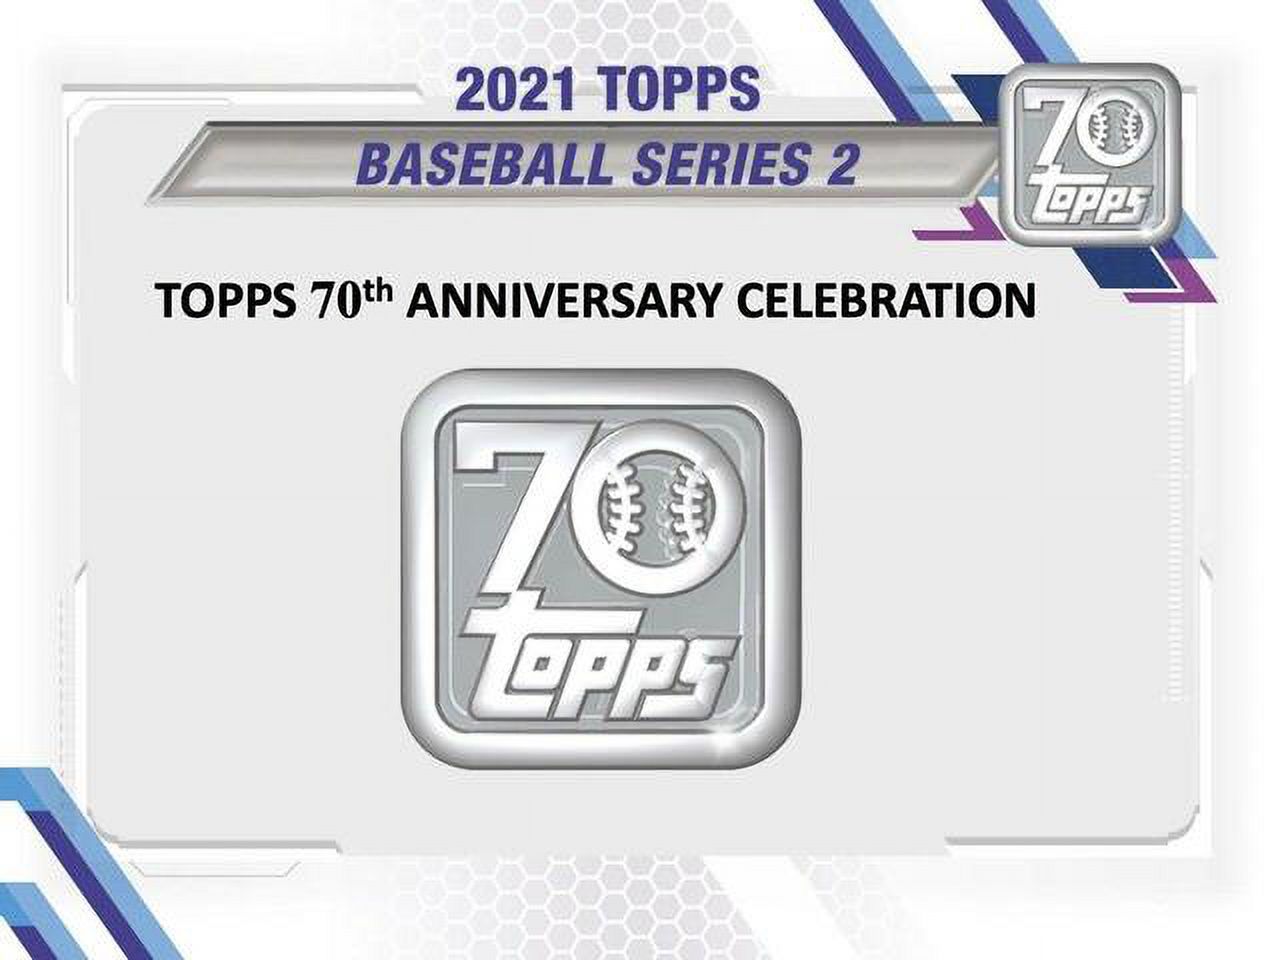 2021 Topps Series 2 Baseball Trading Cards Blaster Box- 1 Exclusive Relic Box Manufactured Item card - image 1 of 3